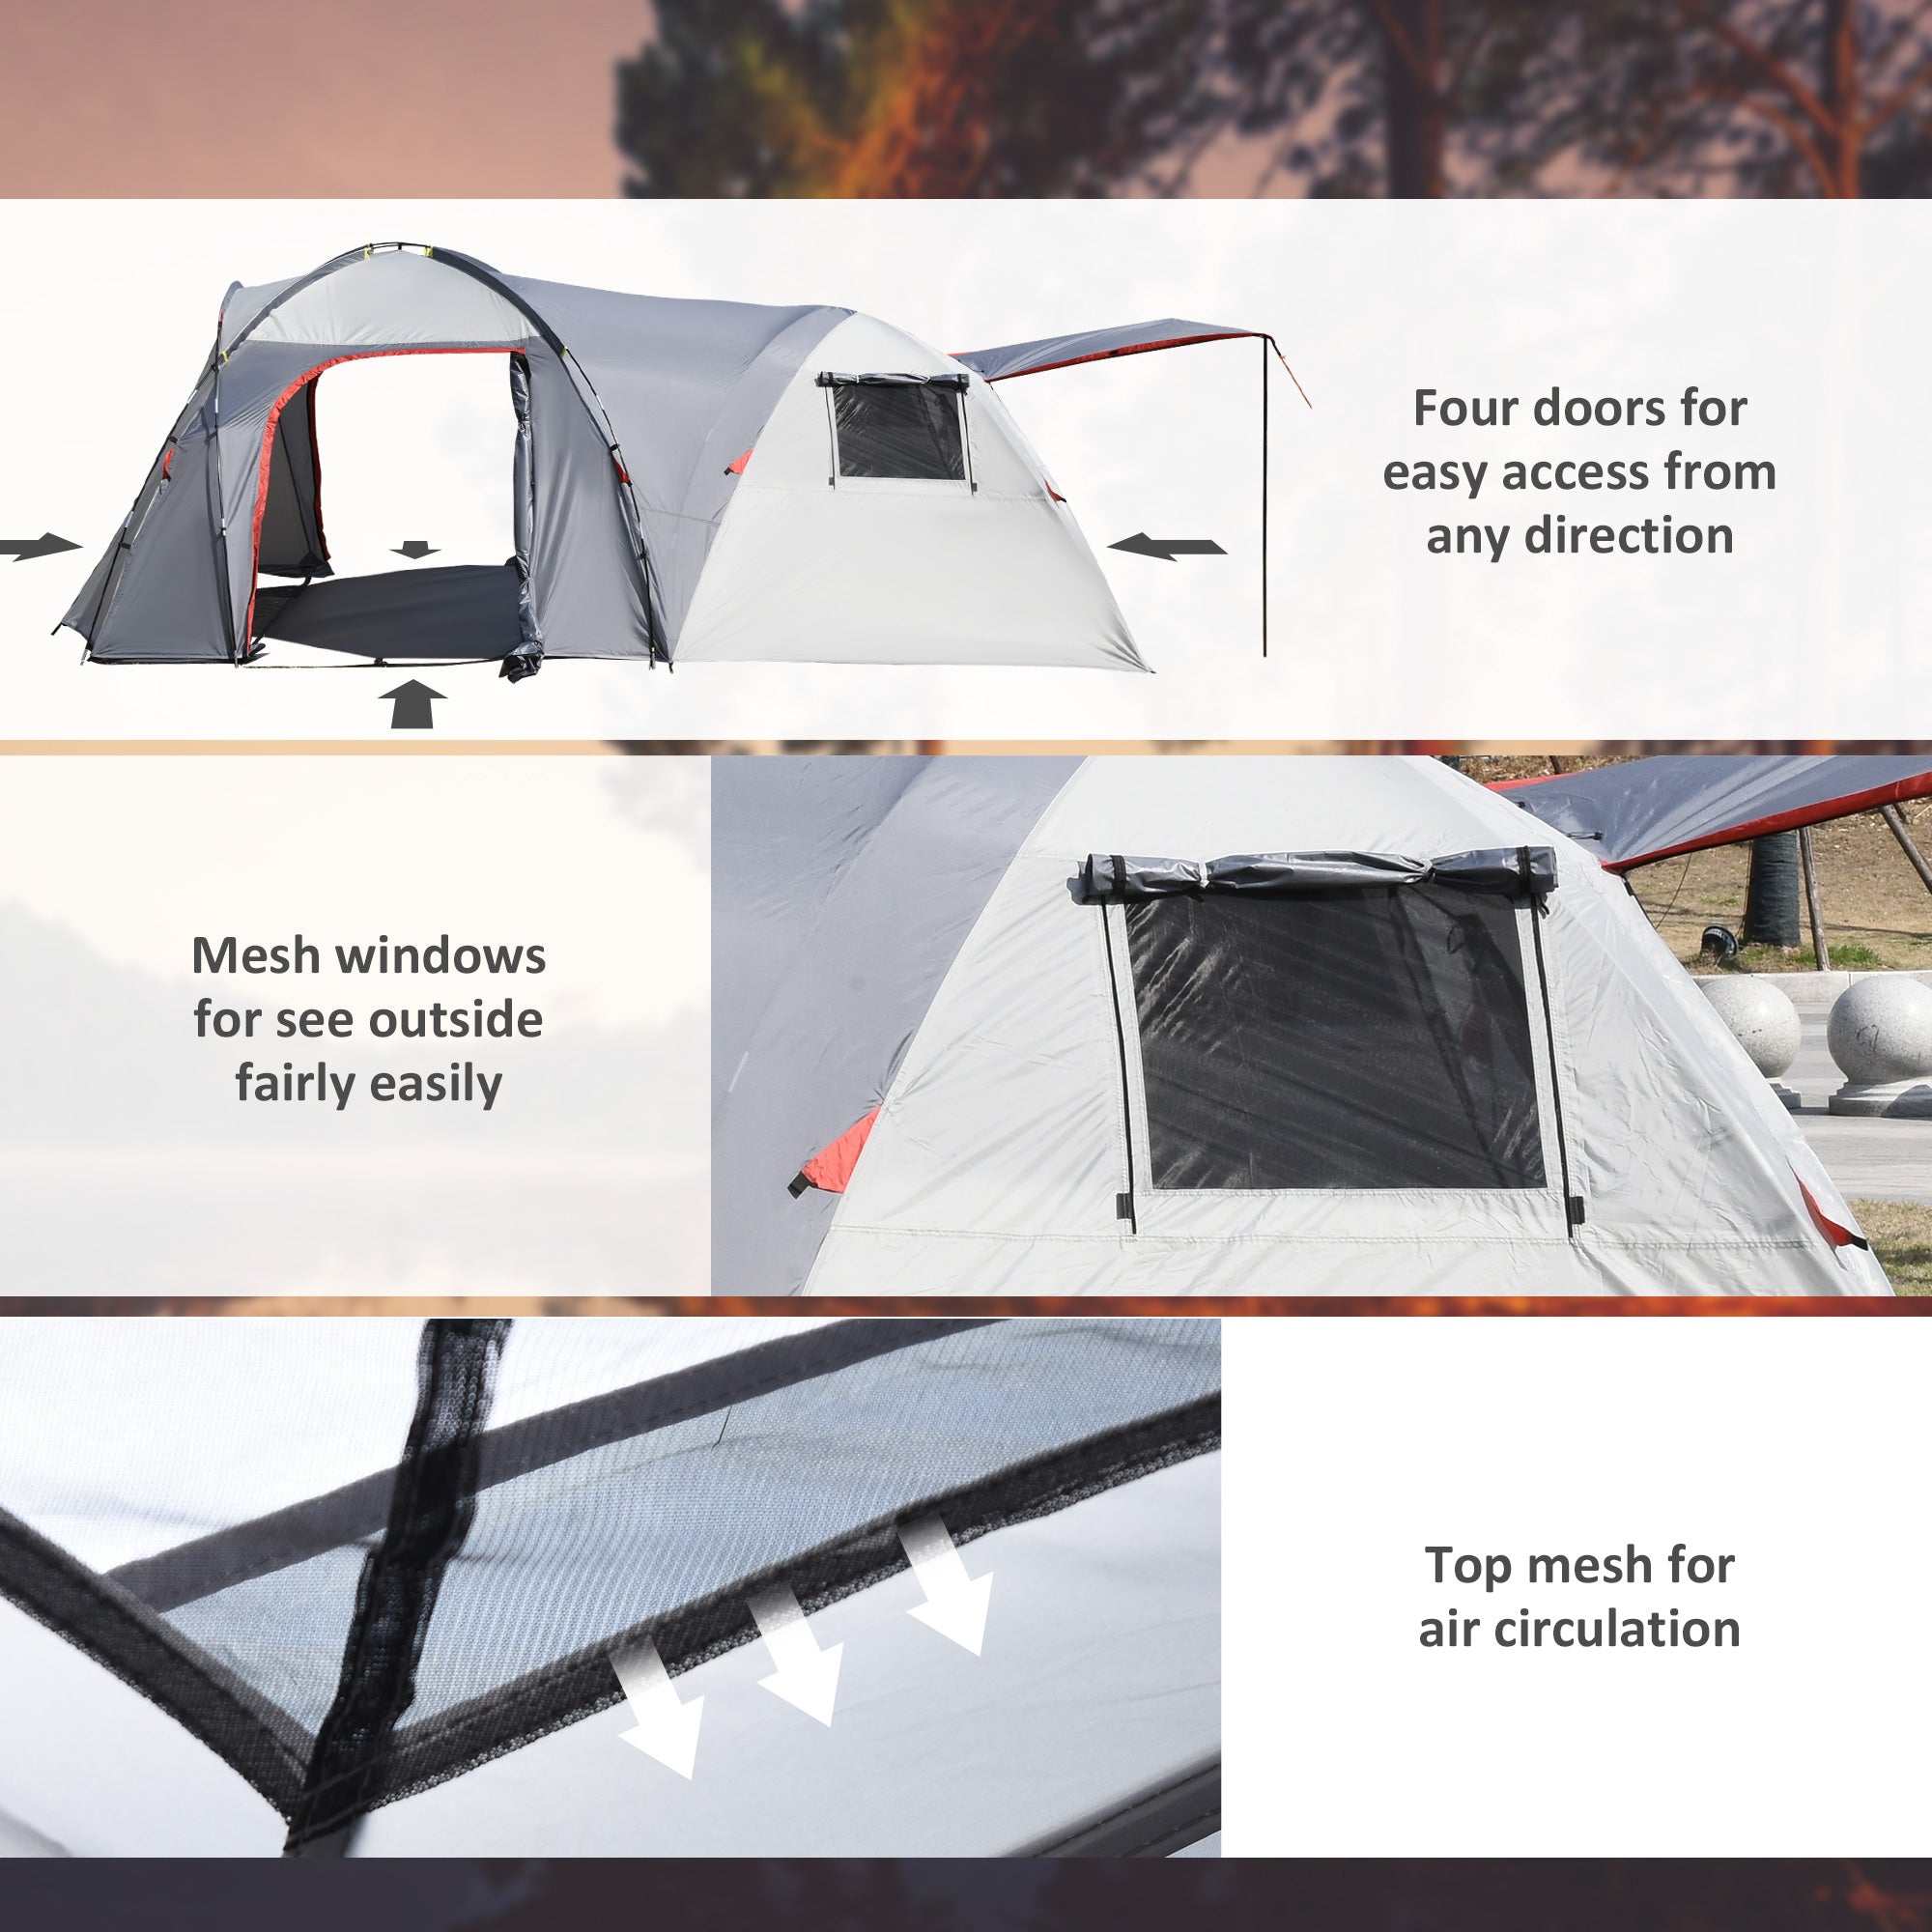 Outsunny 4-5 Man Outdoor Tunnel Tent, Two Room Camping Tent with Portable Mat, Sewn-In Floor Breathable Mesh Windows for Fishing, Festival, Hiking